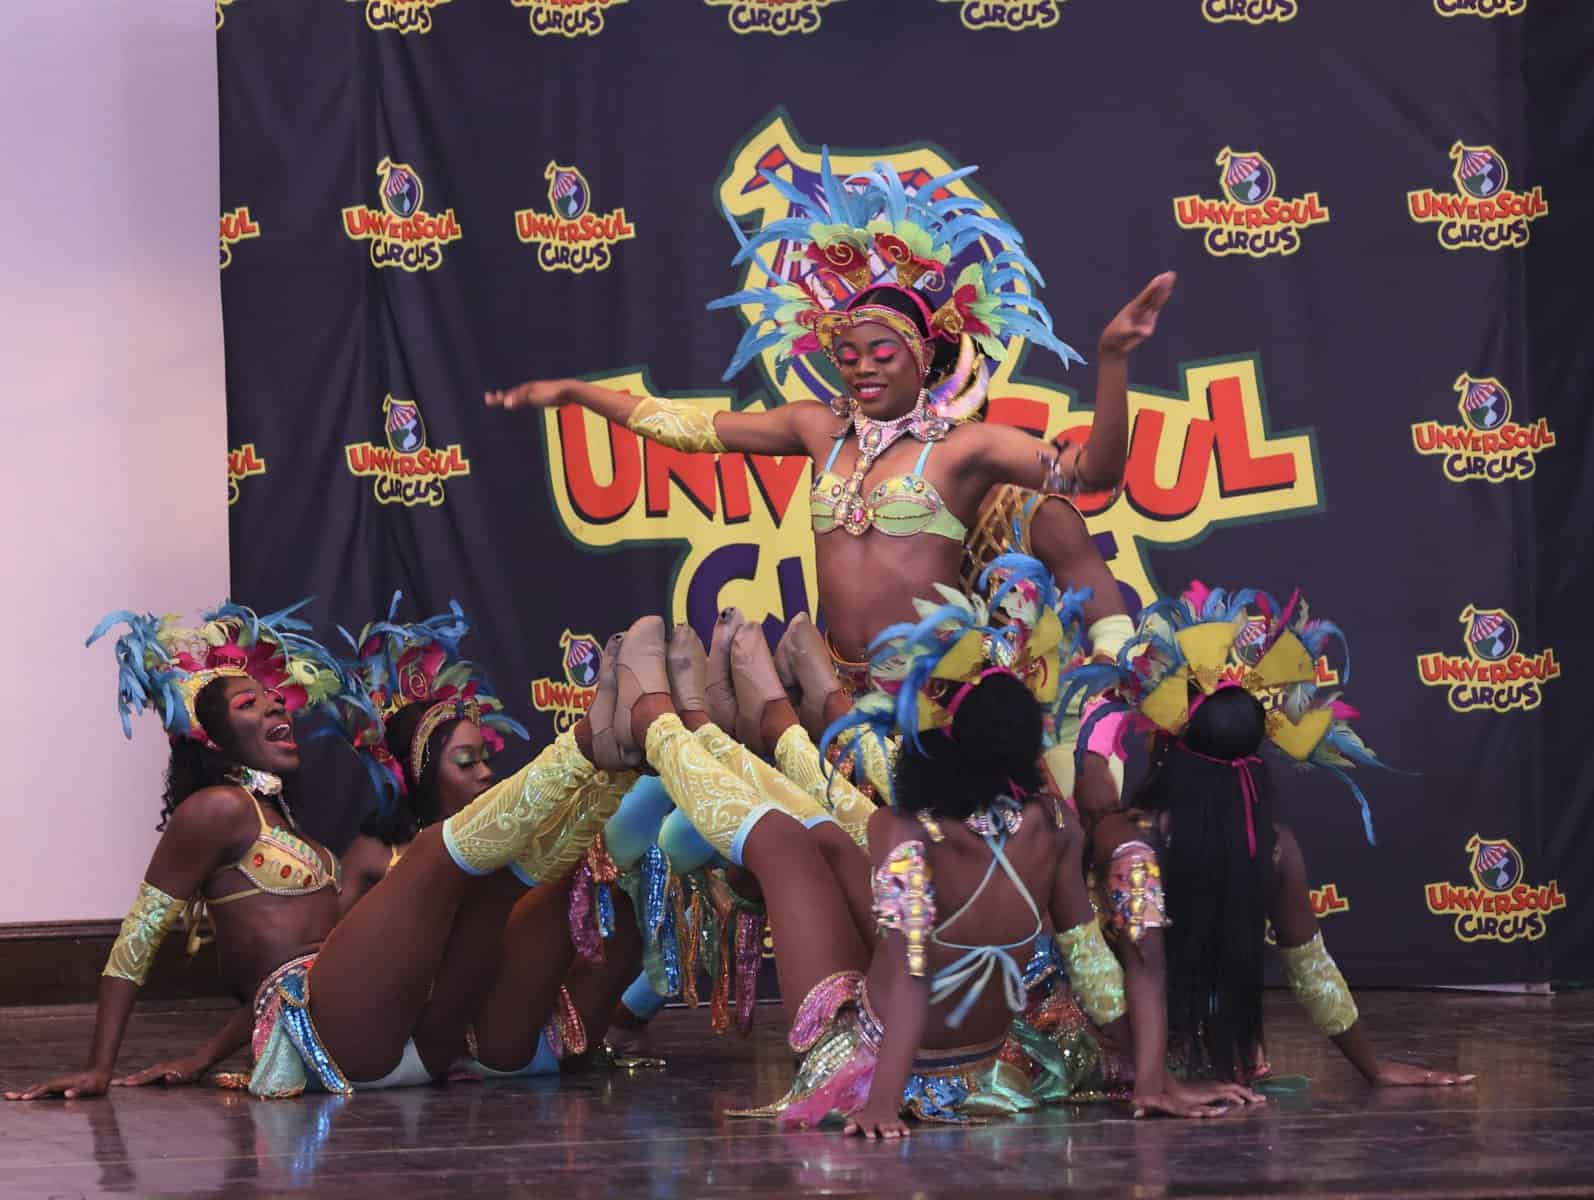 UniverSoul performs at Universal Alcorn